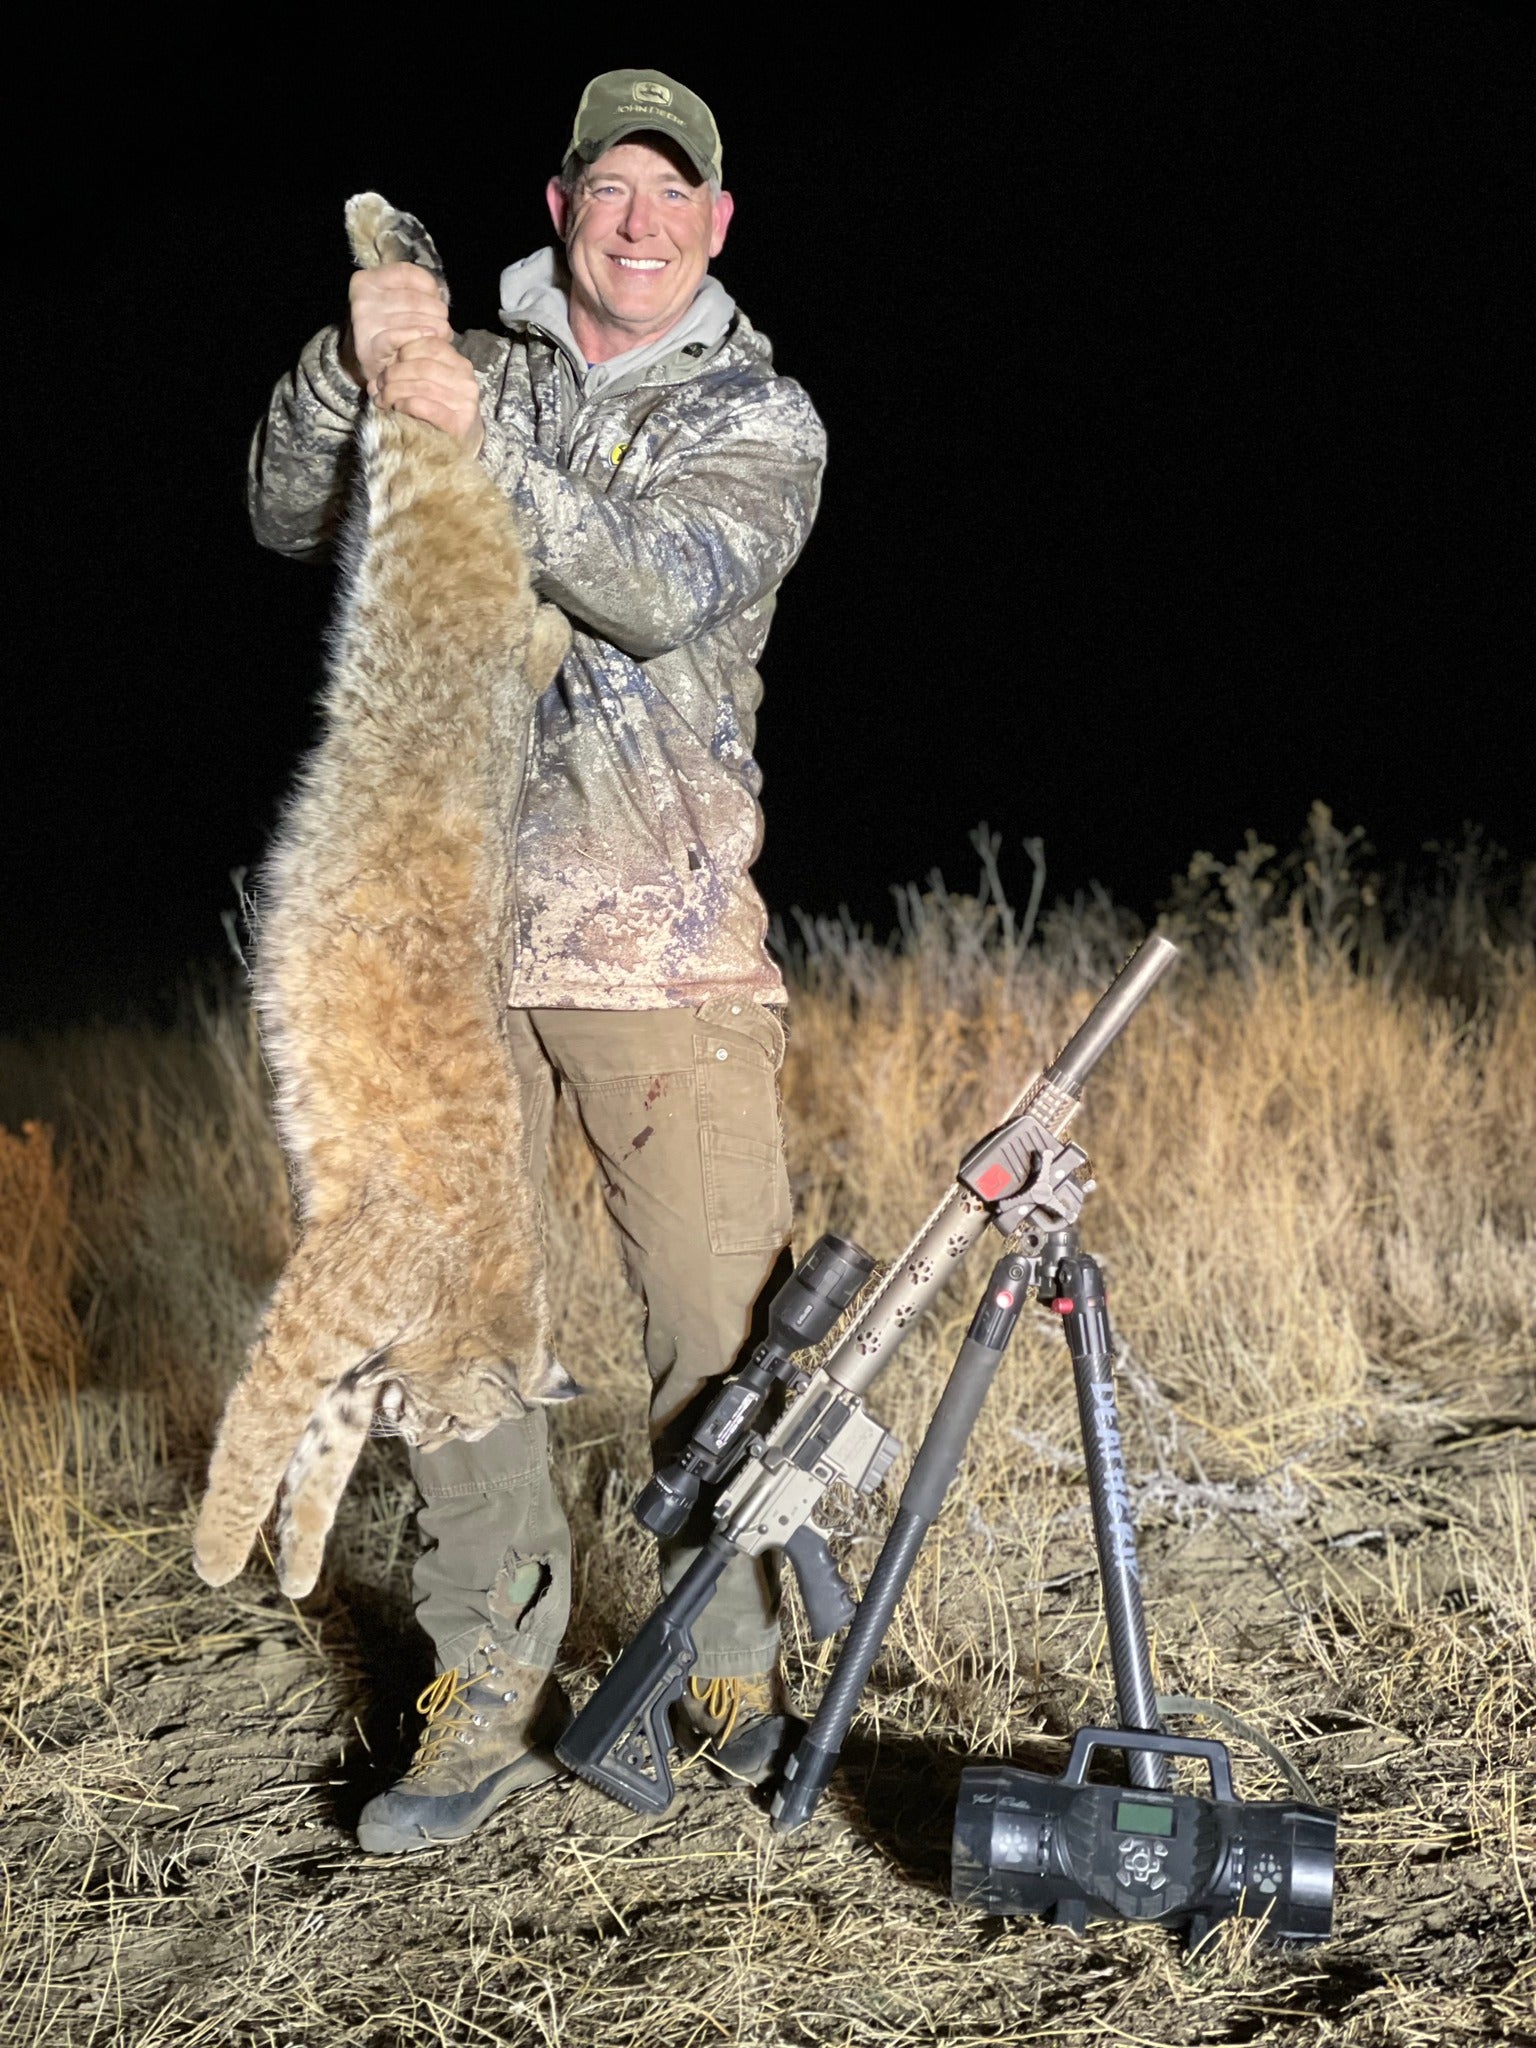 ATN and Fred Eichler Team Up to Promote the 2022 Hunting Season